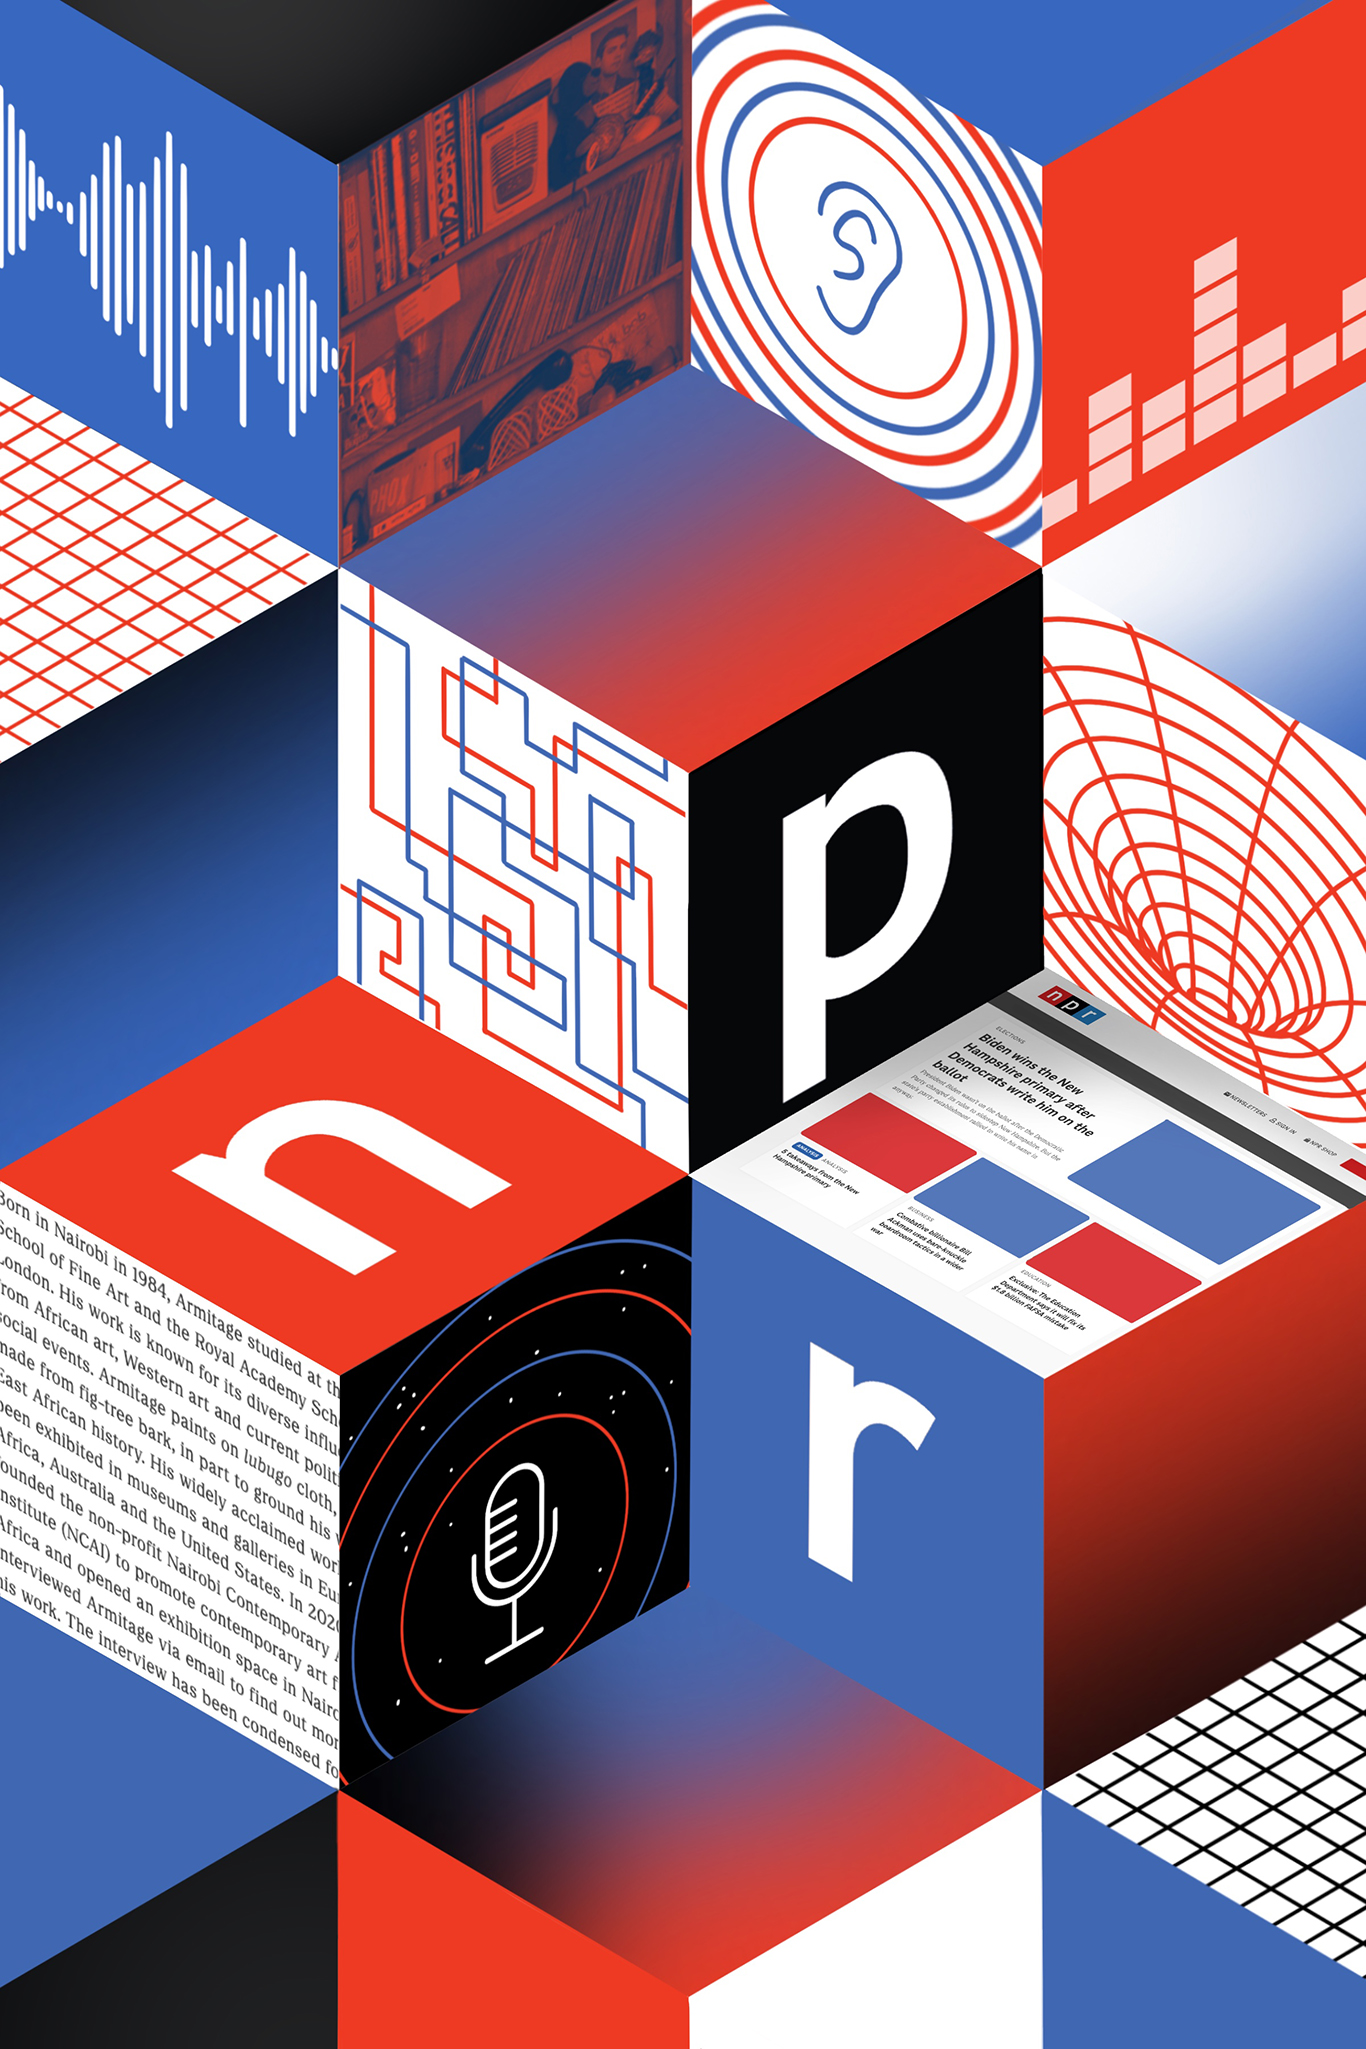 A poster with black, red, blue, and white square blocks where each block contains a different illustration of a shape or pattern related to the theme of radio along with white text that reads “NPR”.